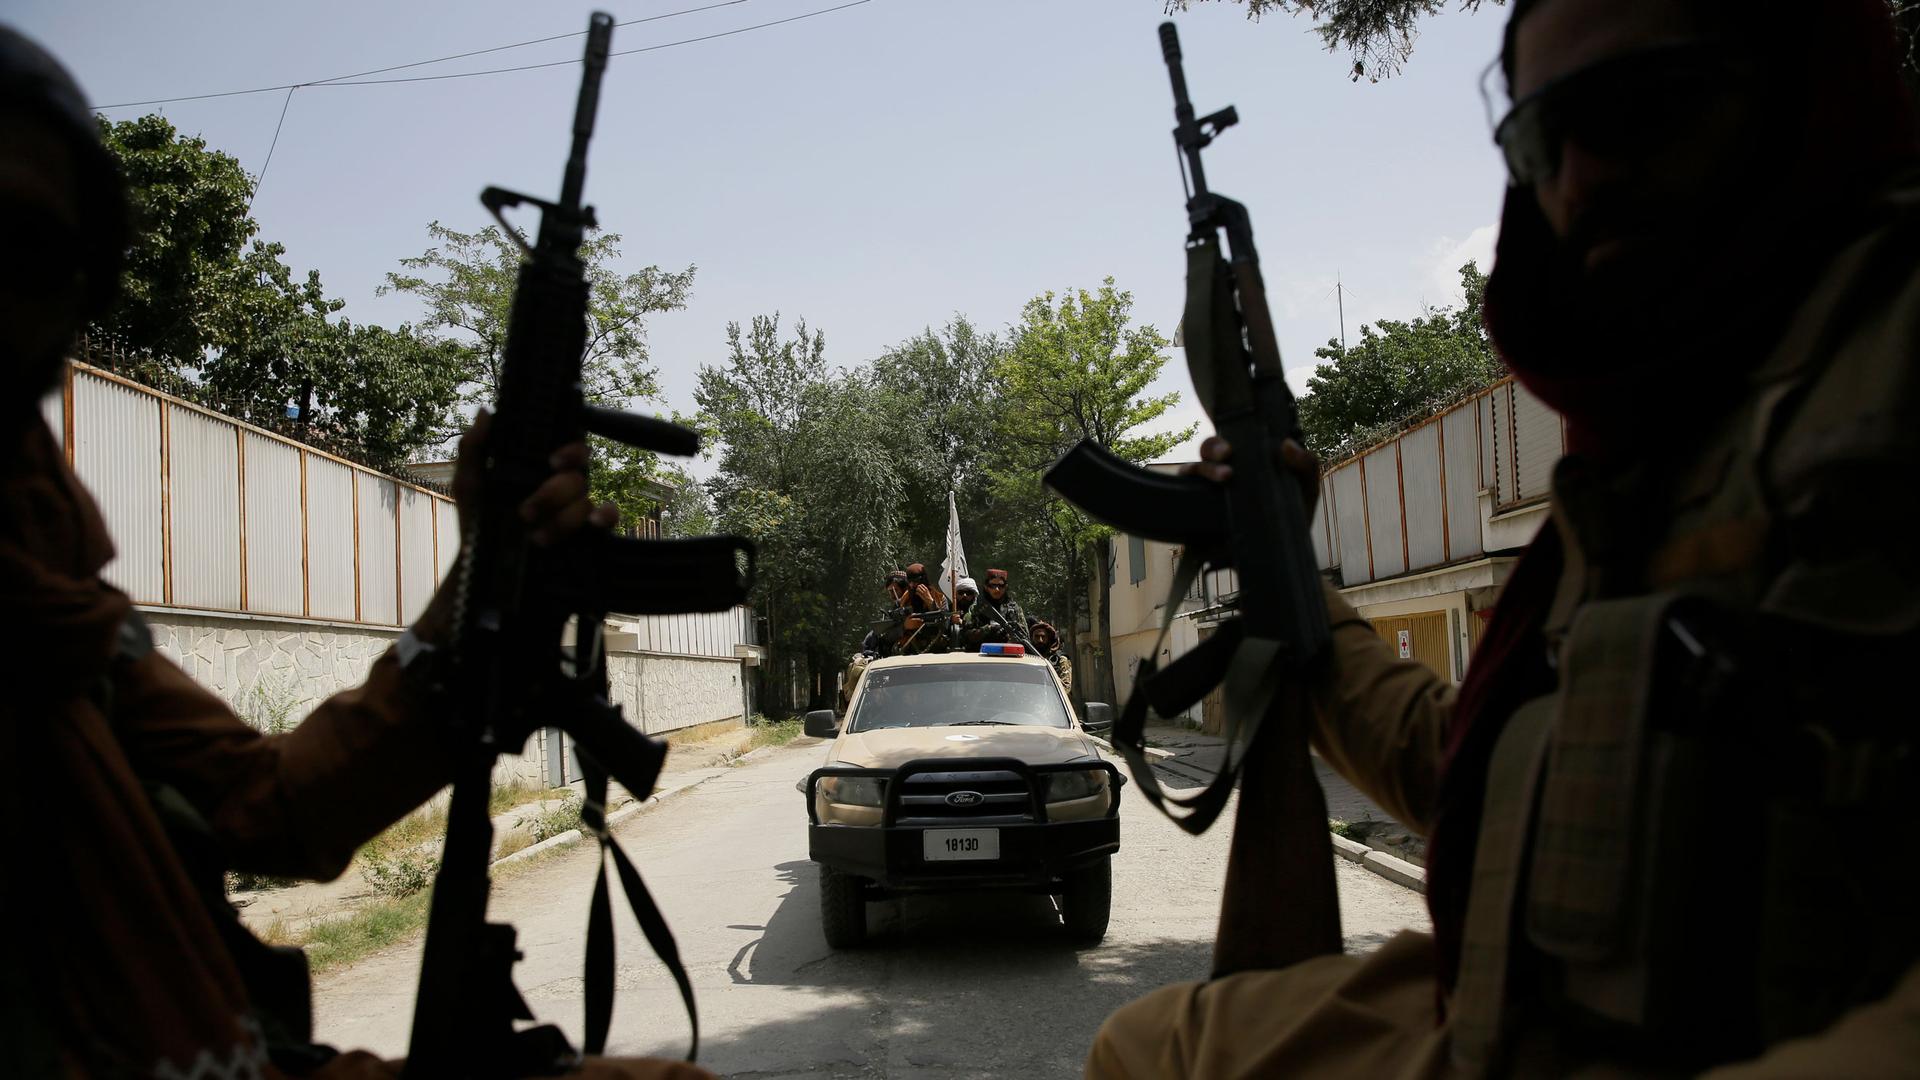 A pickup truck is shown flying the white and black Taliban flag in the distance with two people holding rifles in the nearground.